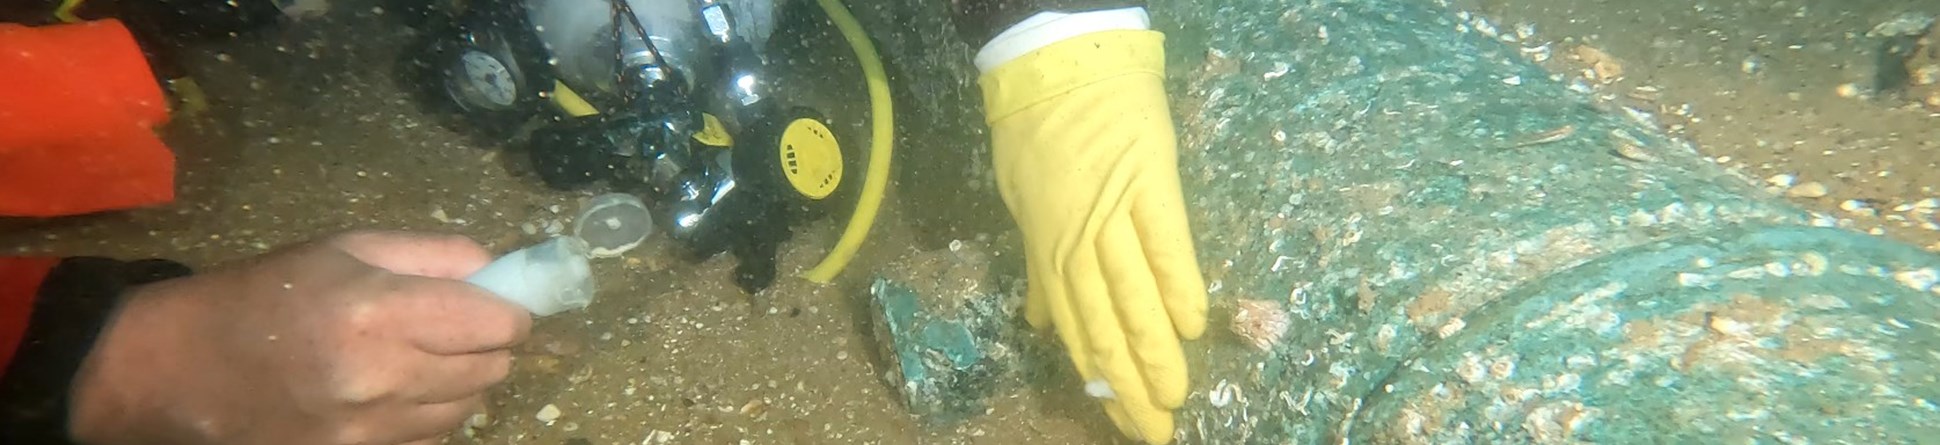 A diver applying a protective marking solution on the 'Klein Hollandia' protected wreck site.